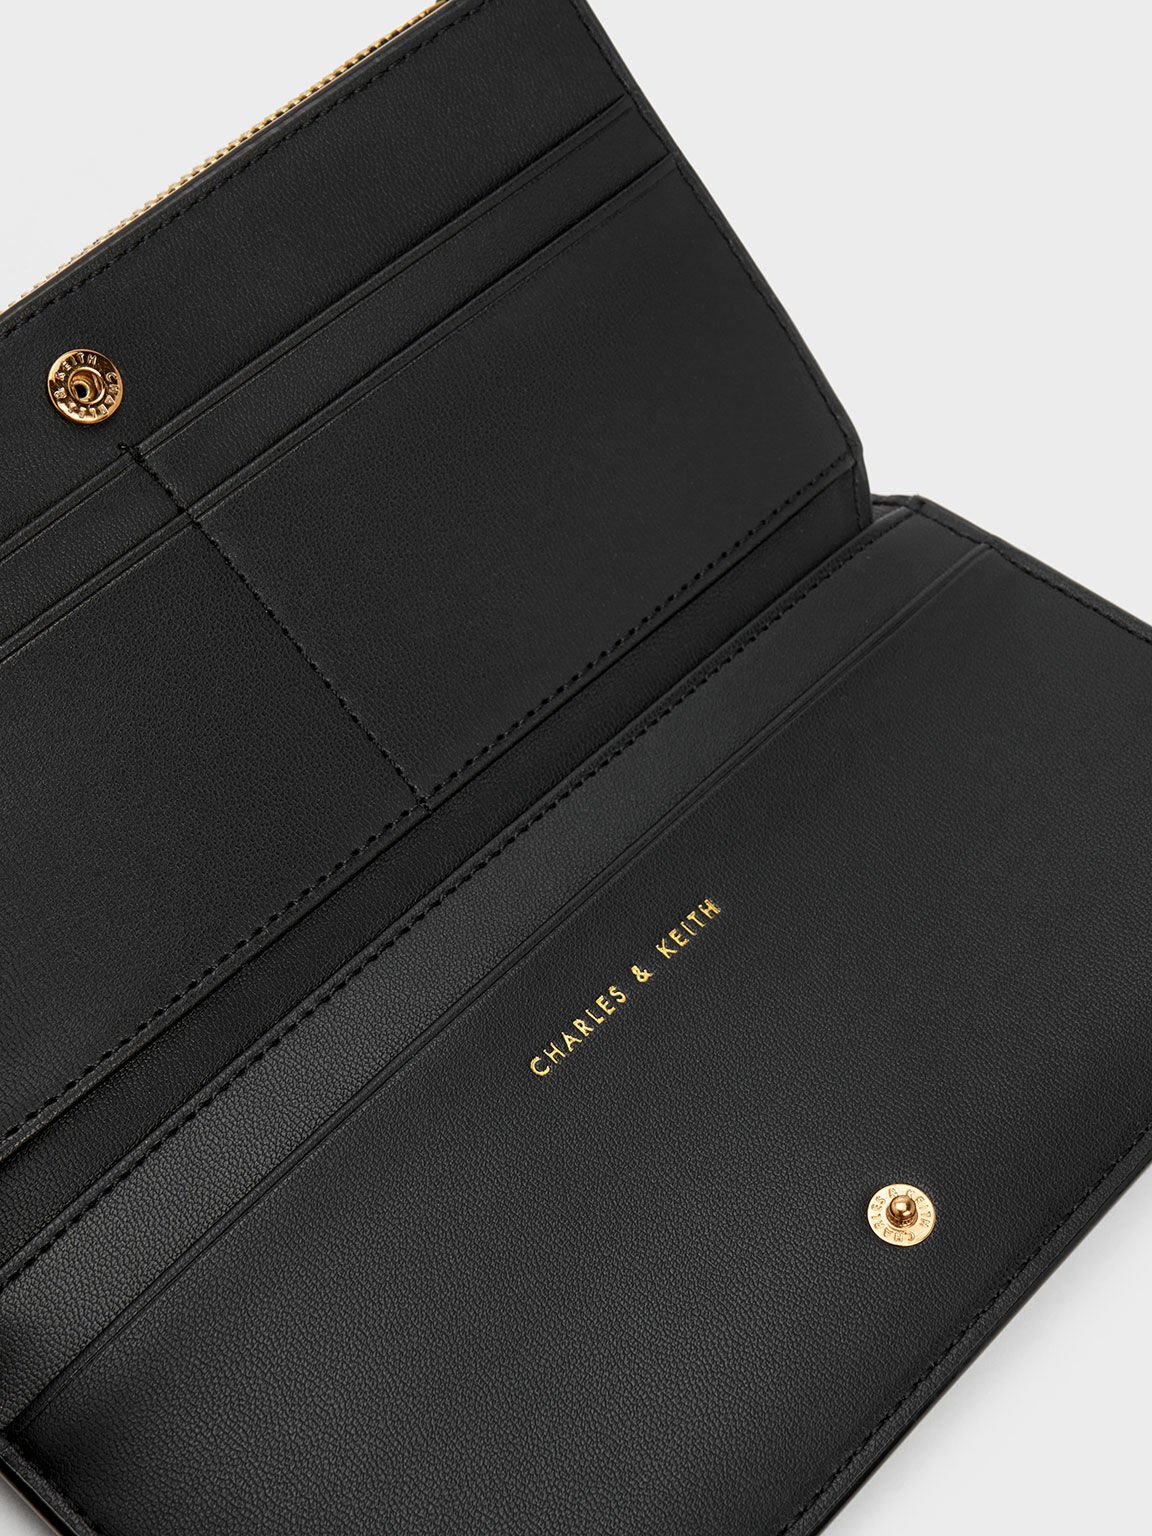 Black Quilted Card Holder - CHARLES & KEITH TH